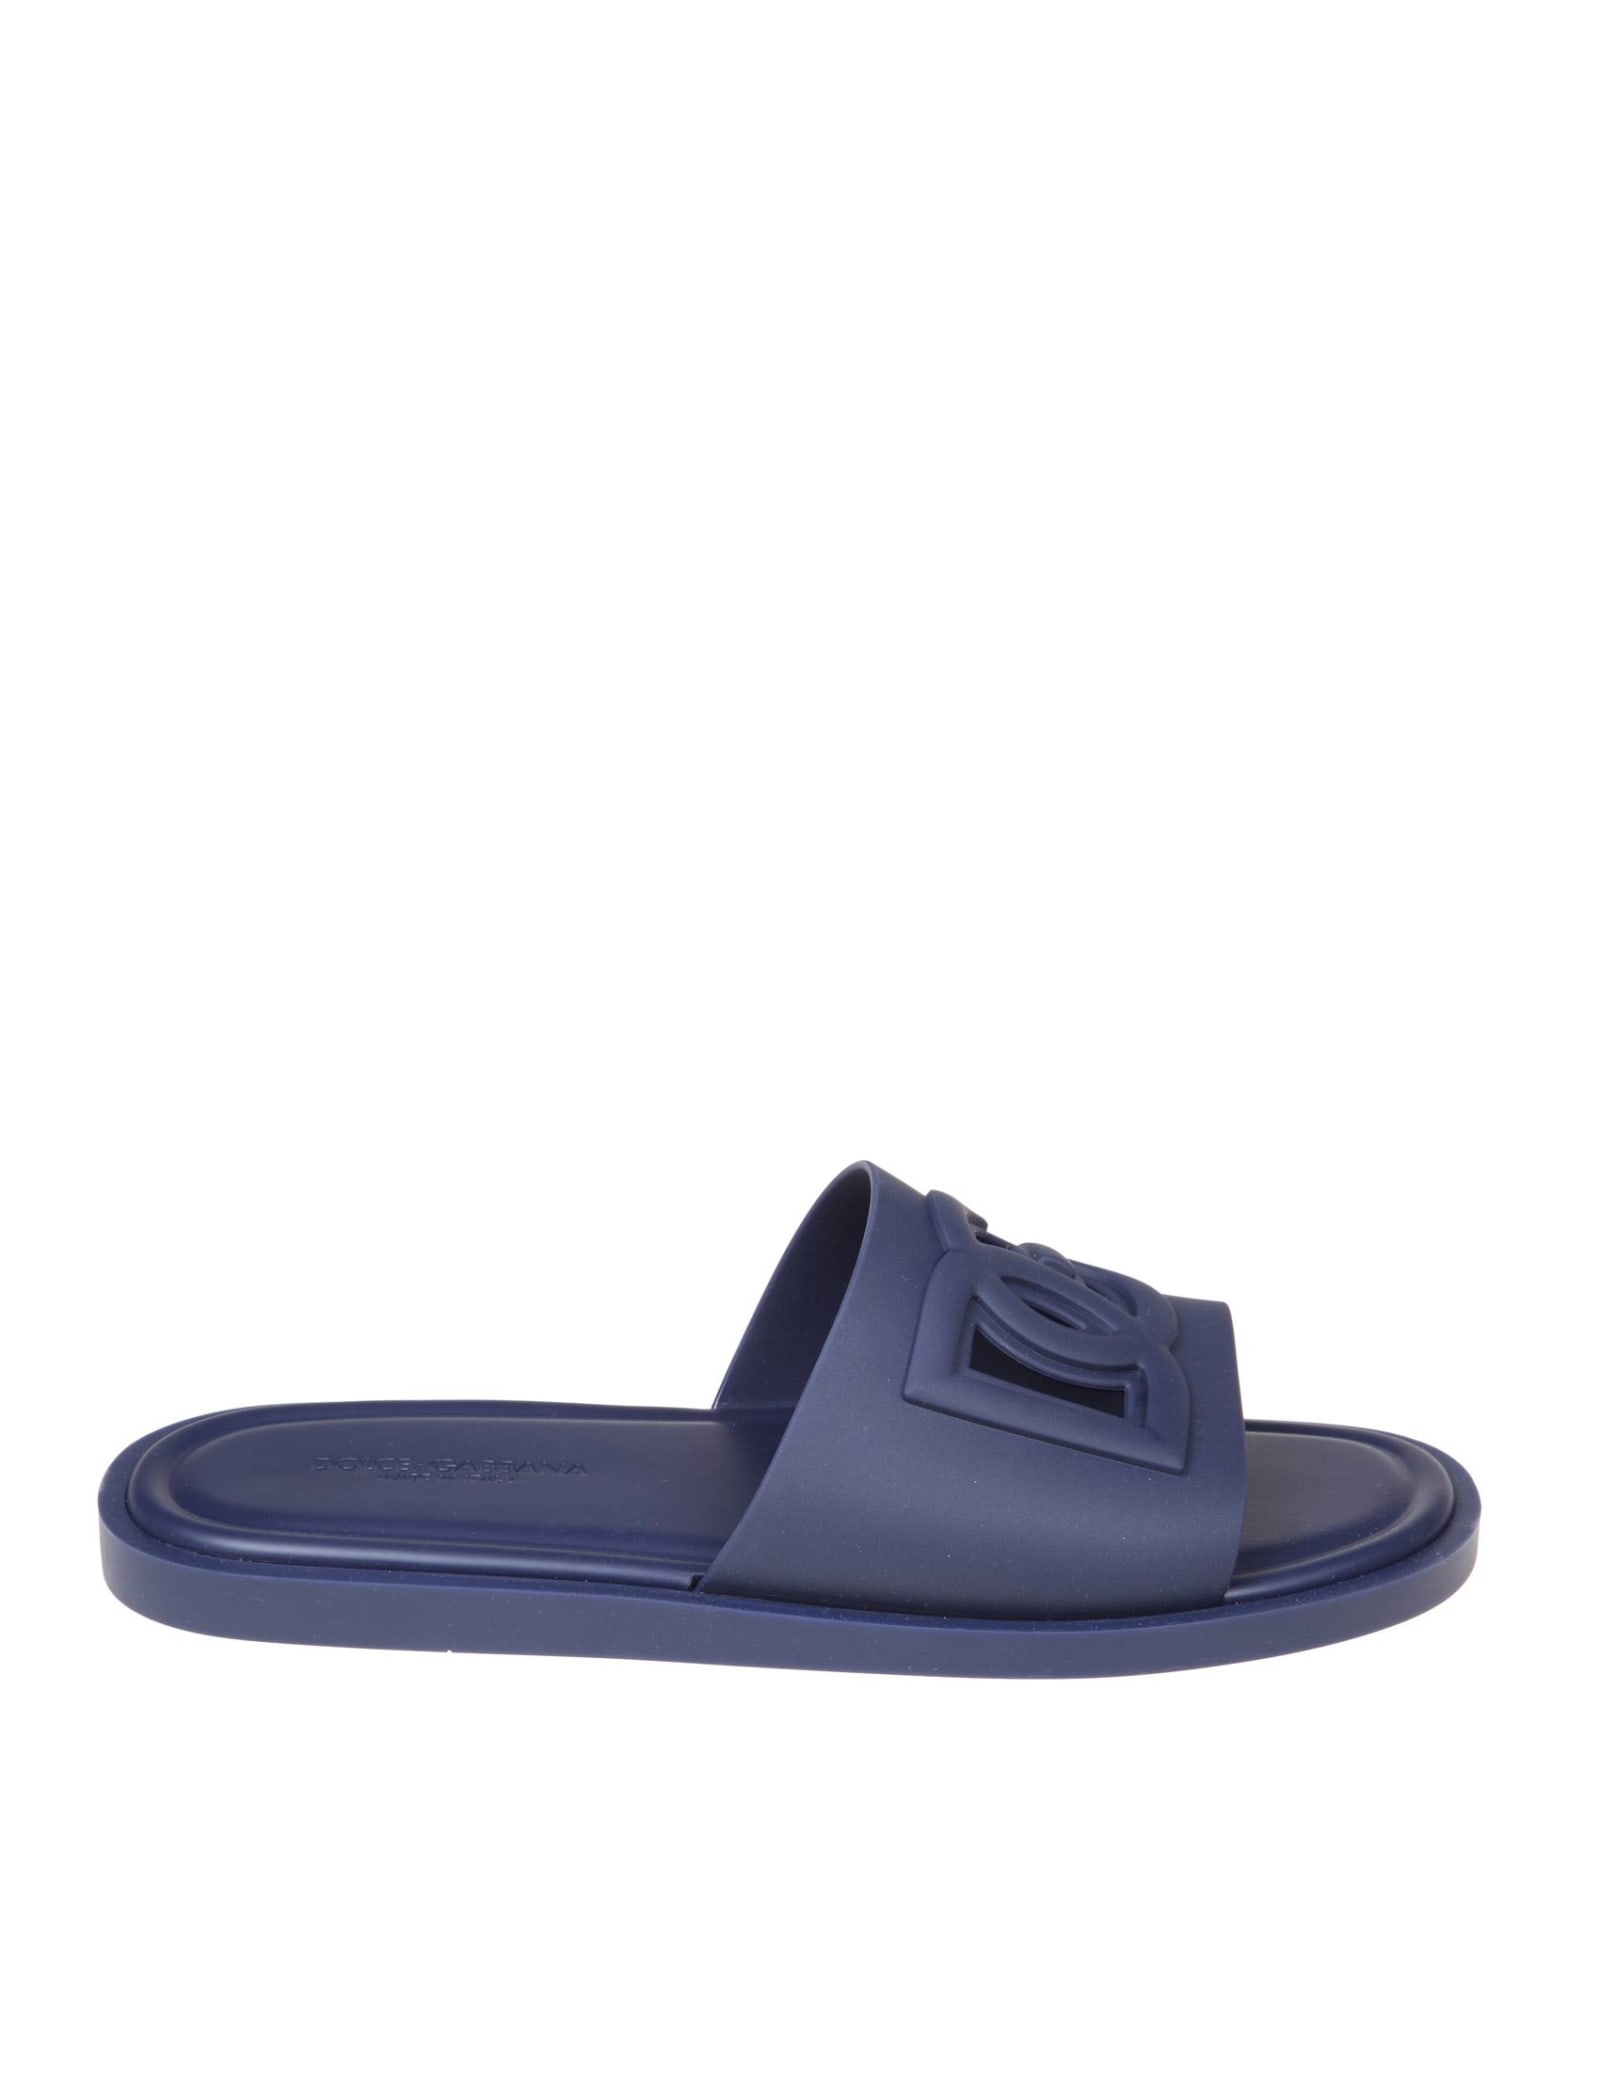 Dolce & Gabbana Rubber Slipper With Perforated Color Blu In Blue